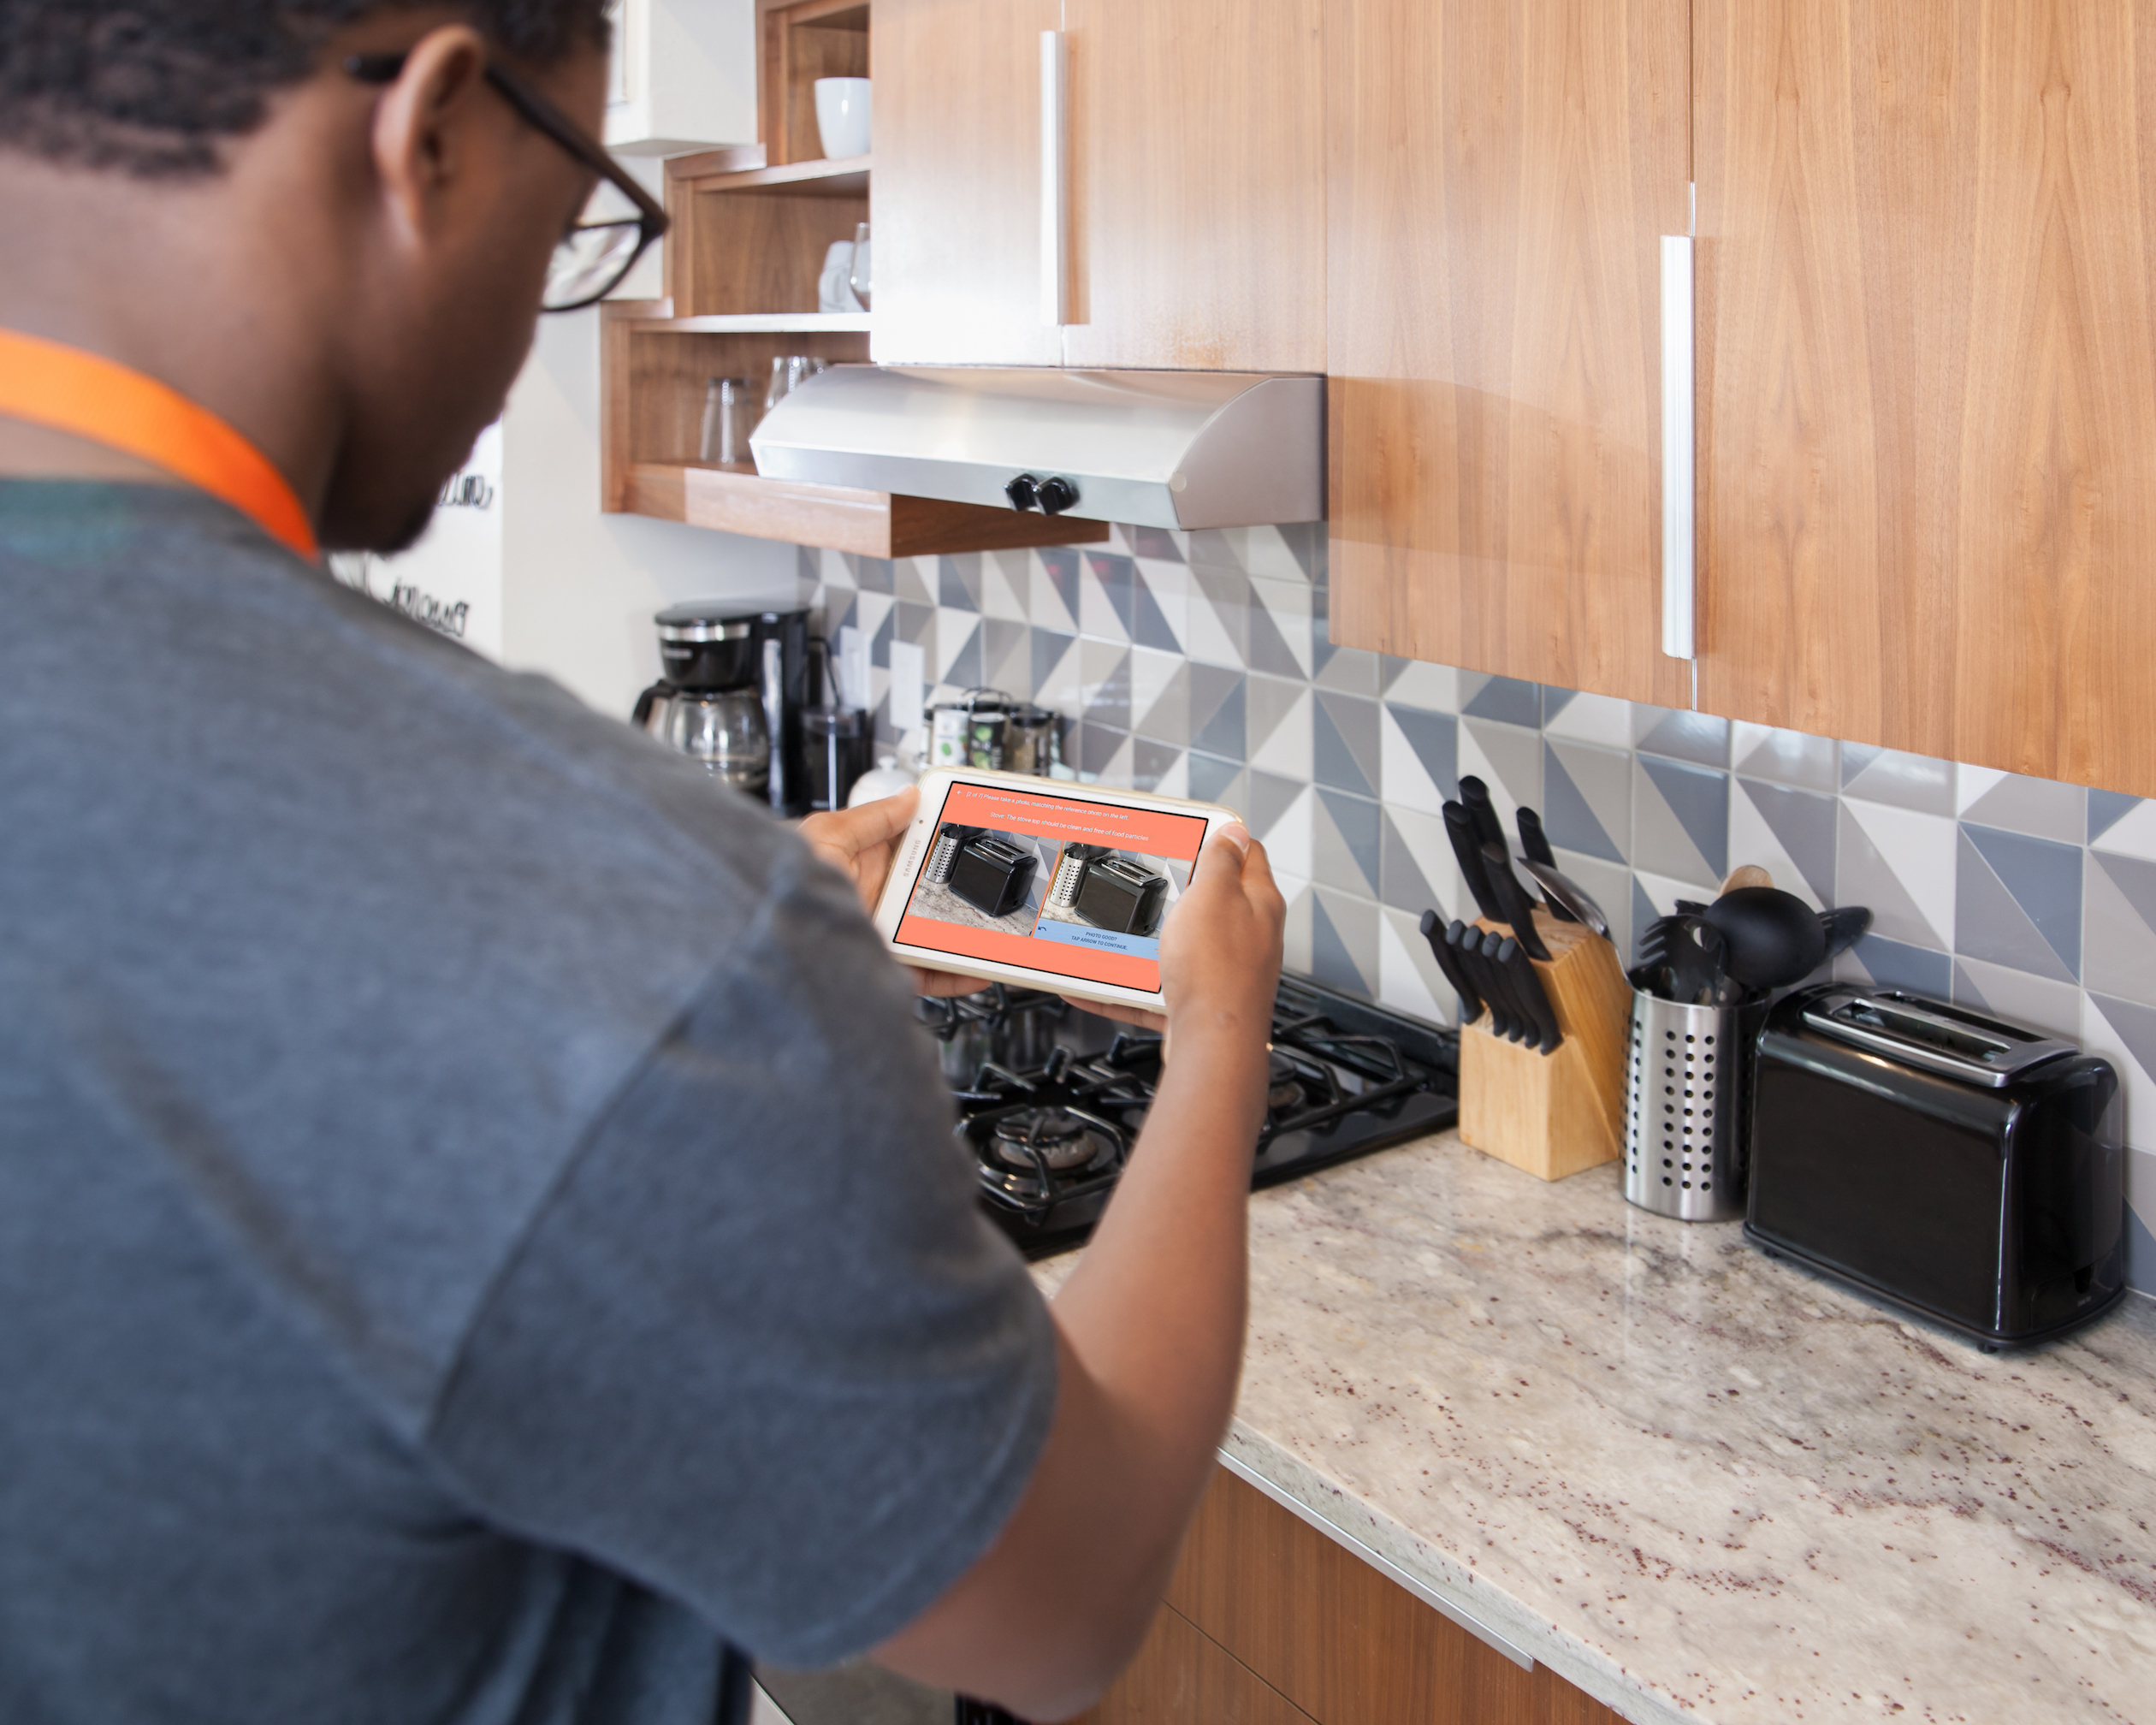 TurnKey FieldSync results in better, more consistent home cleanings by verifying housekeeping jobs through photo comparisons.